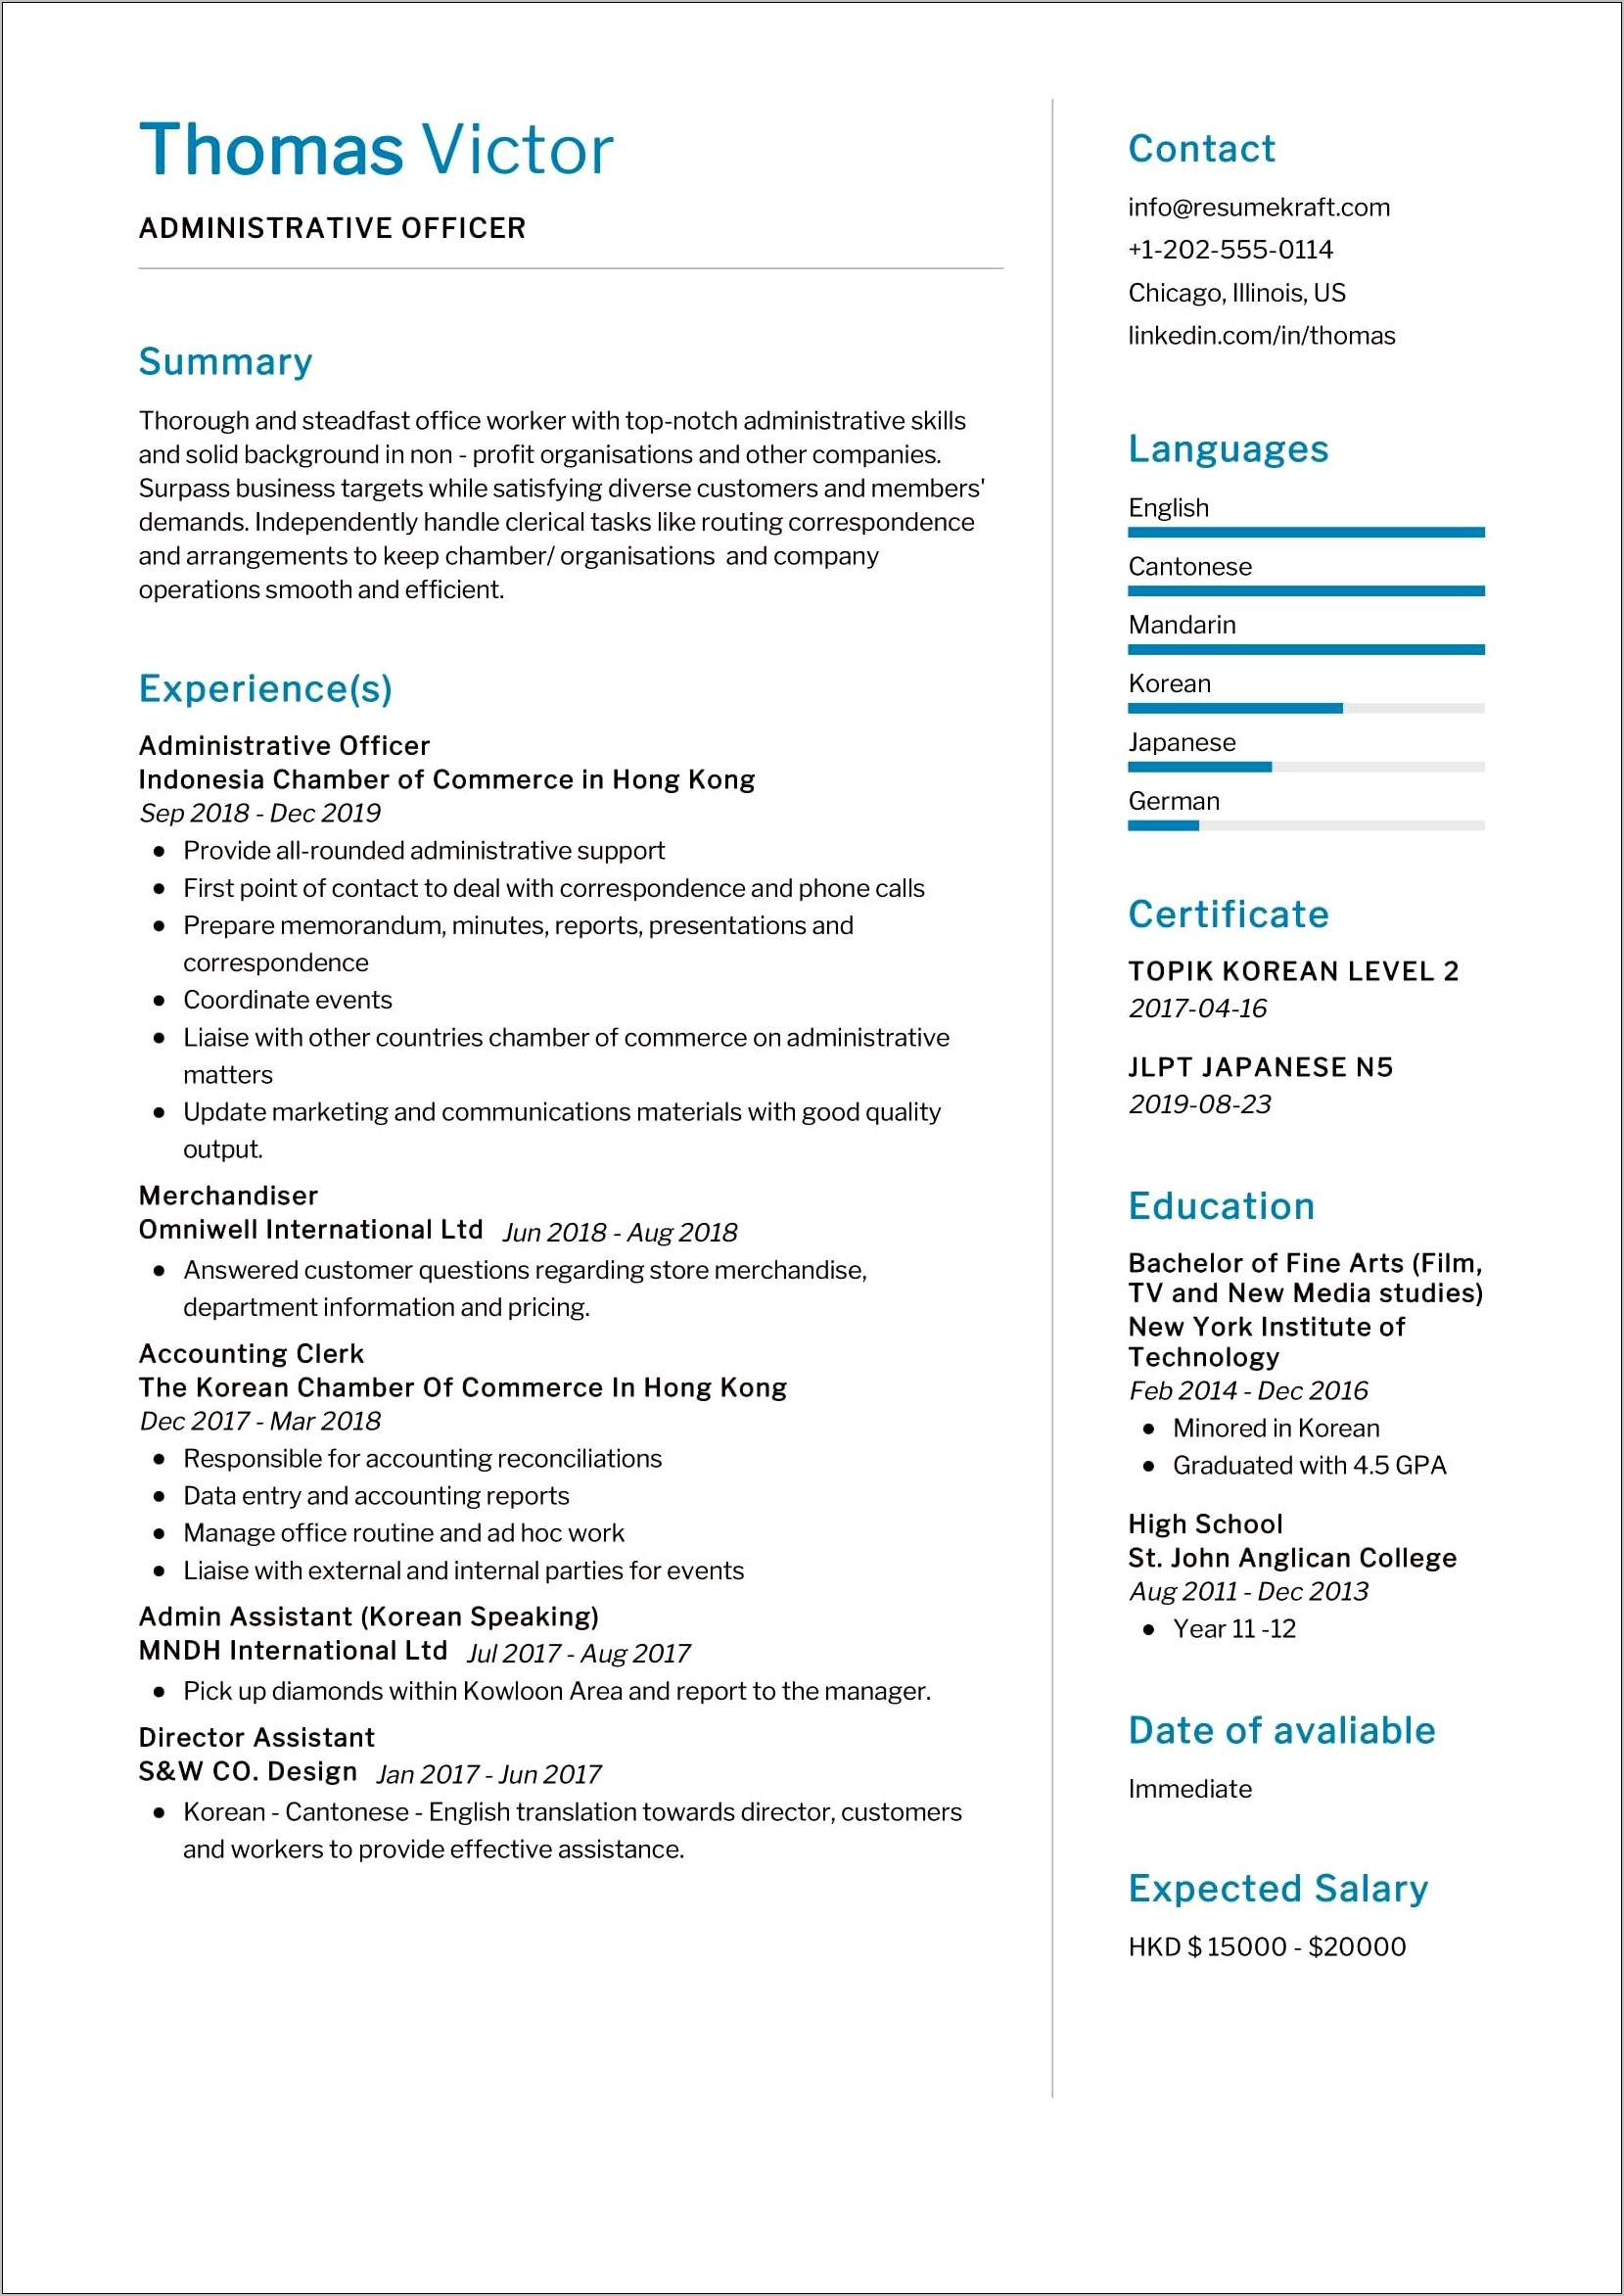 Health And Safety Officer Resume Sample